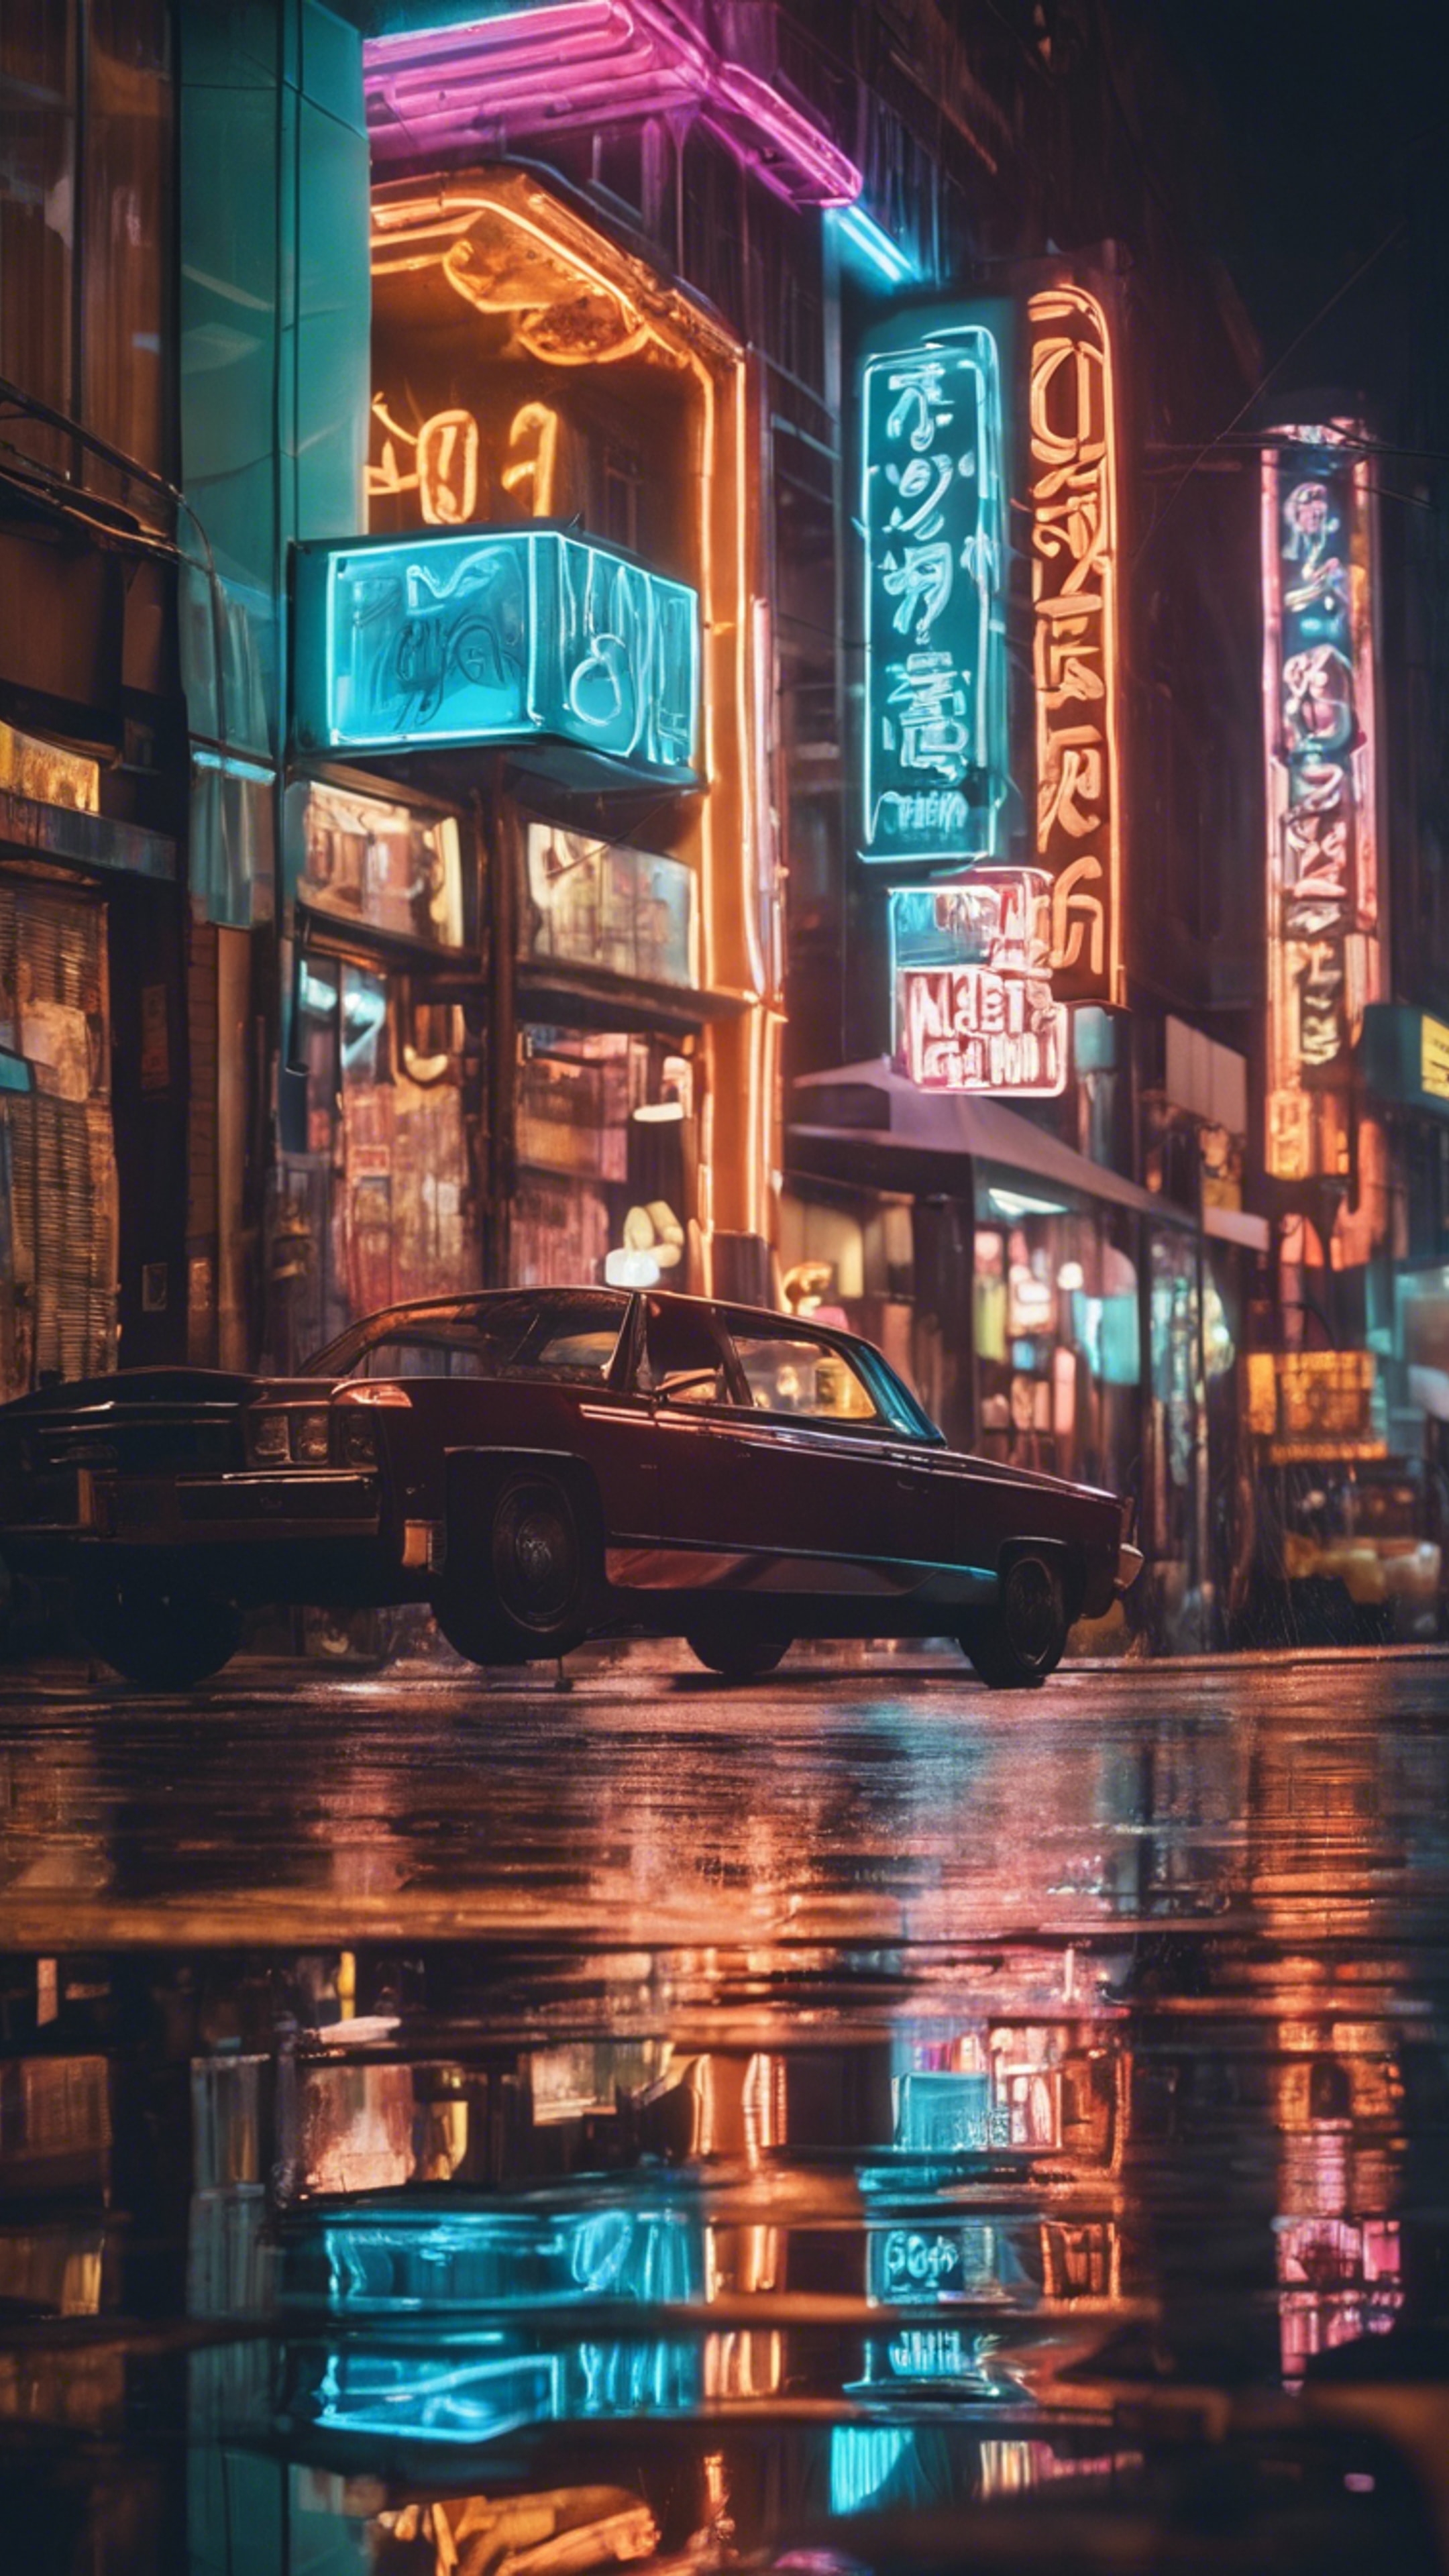 A dream vision of neon signs reflected on wet city streets at night. Tapeta[79232e509baa4ed0a24c]